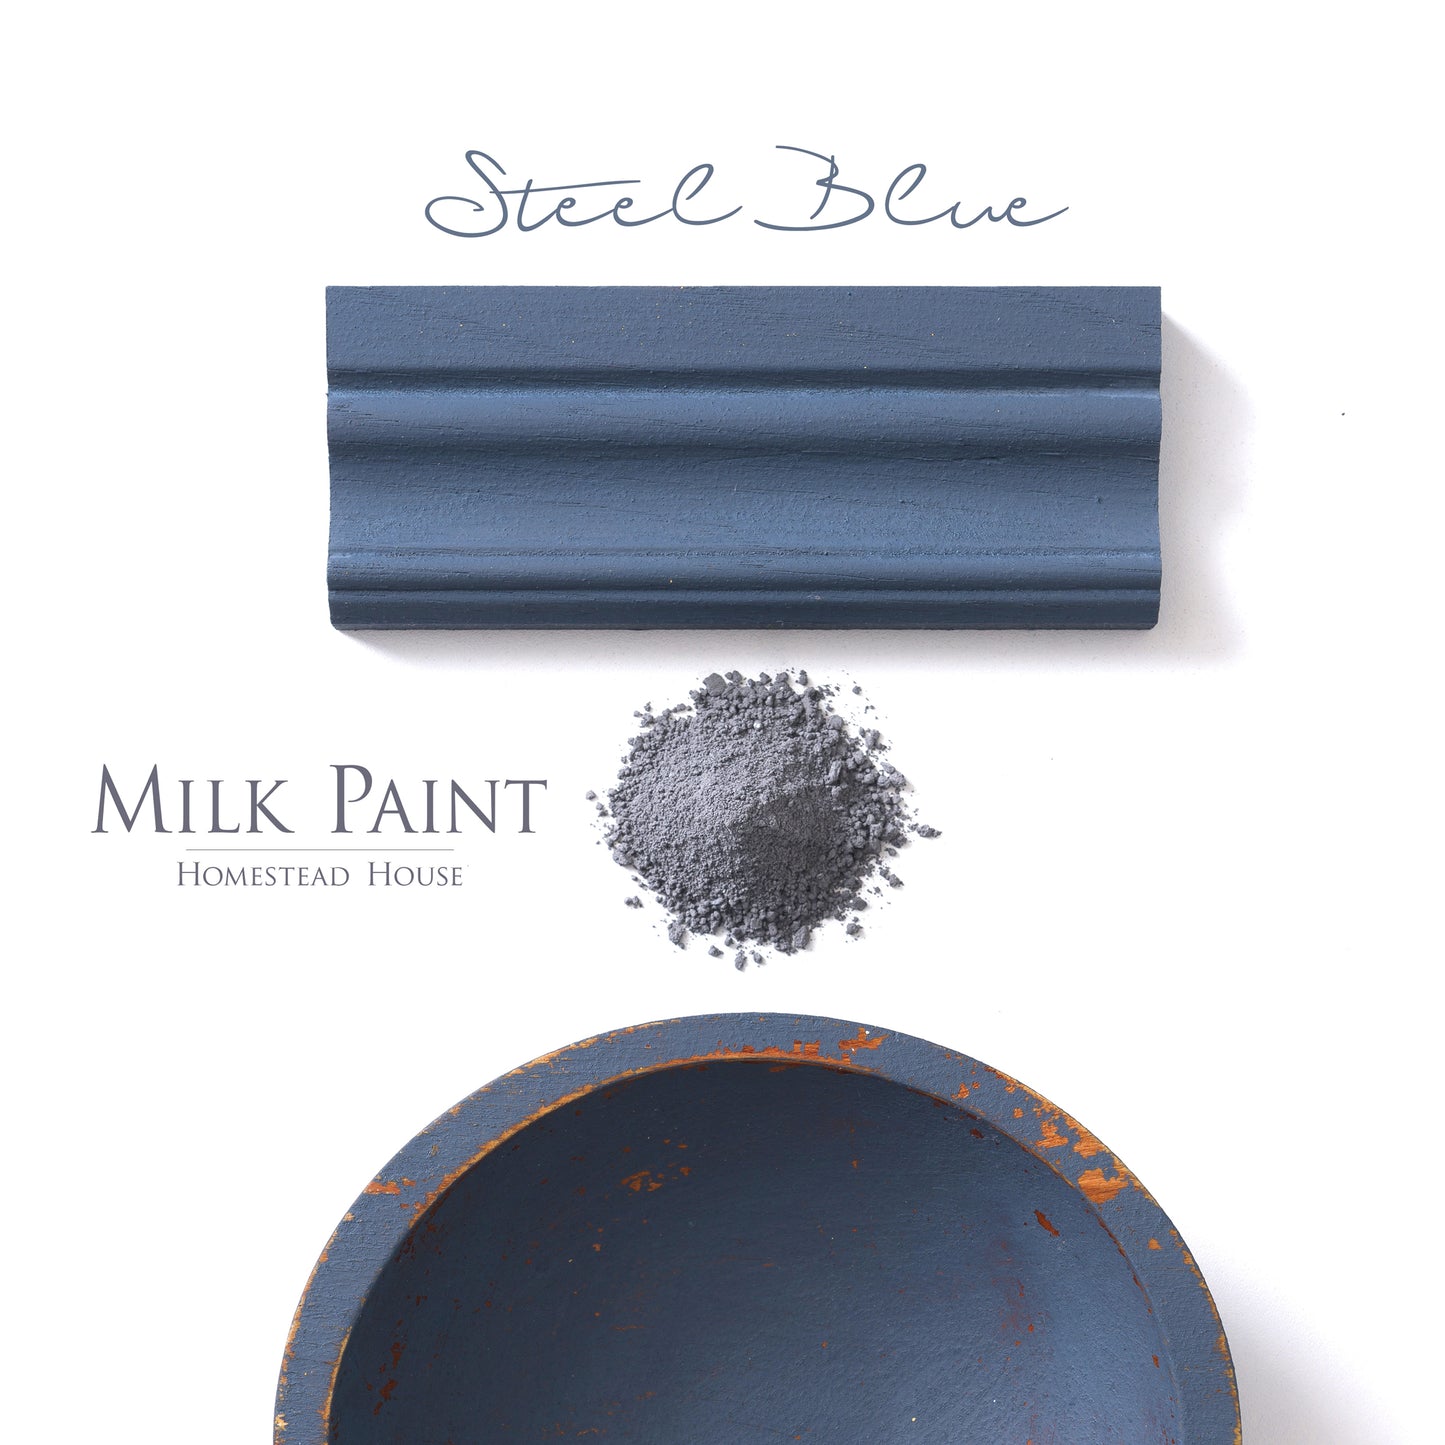 Milk Paint from Homestead House in Steel Blue, deep rich muted blue with a grey undertone.  |  homesteadhouse.ca